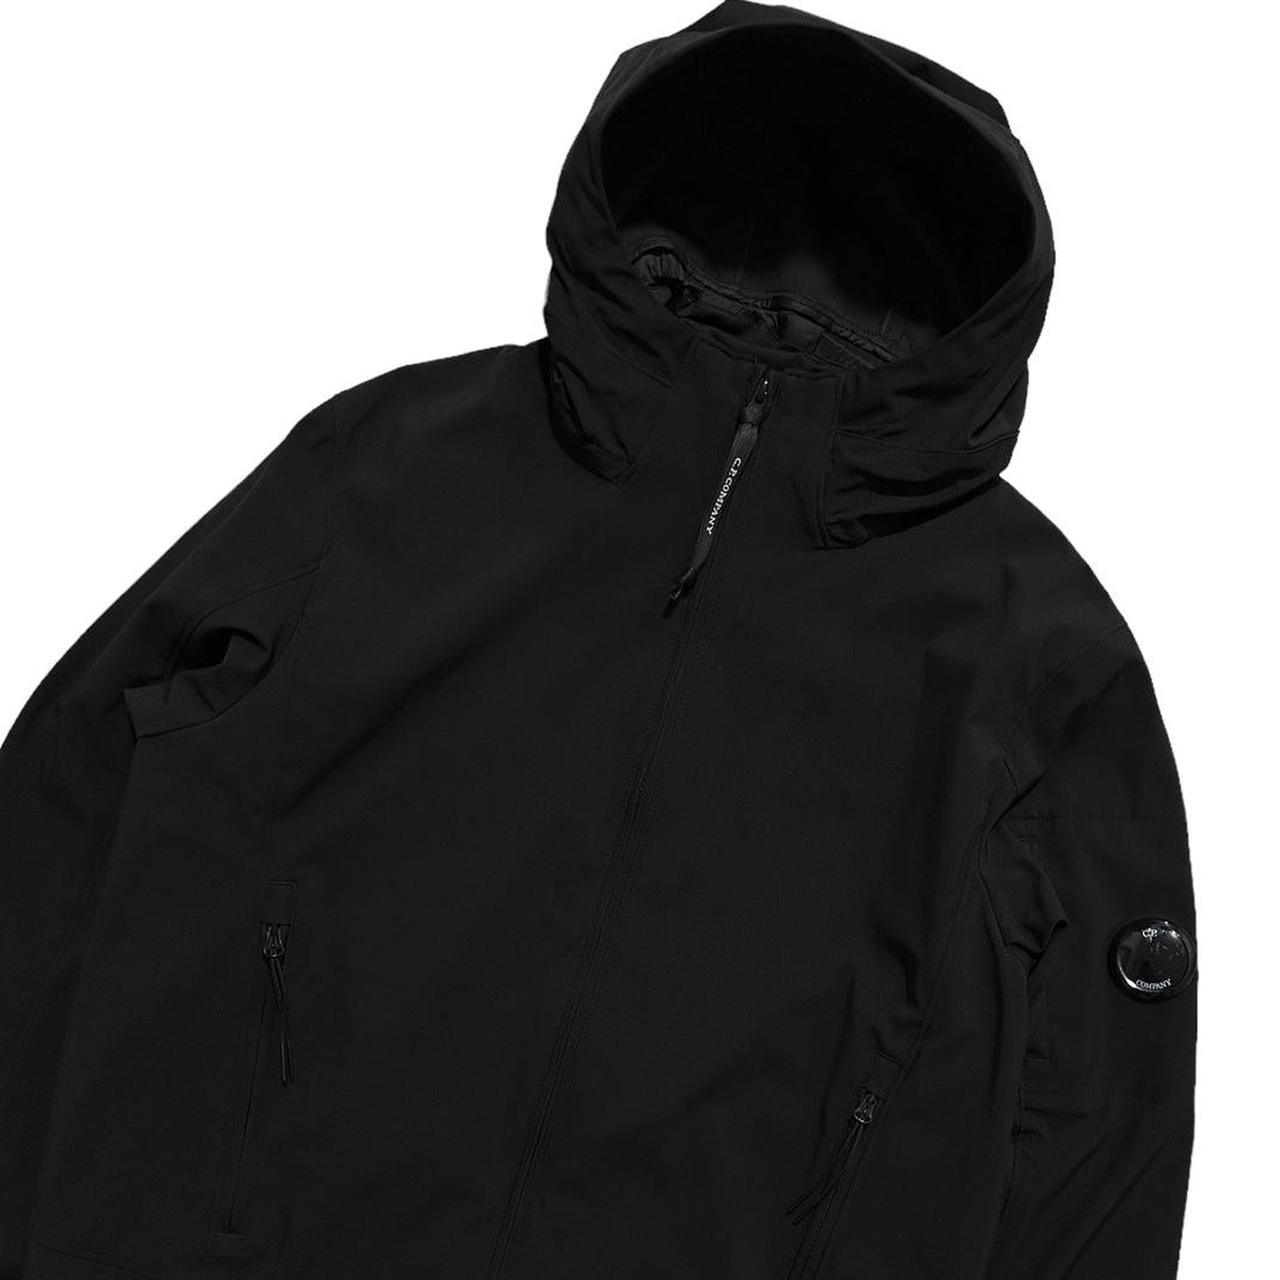 CP Company Shell-R Black Jacket - Known Source